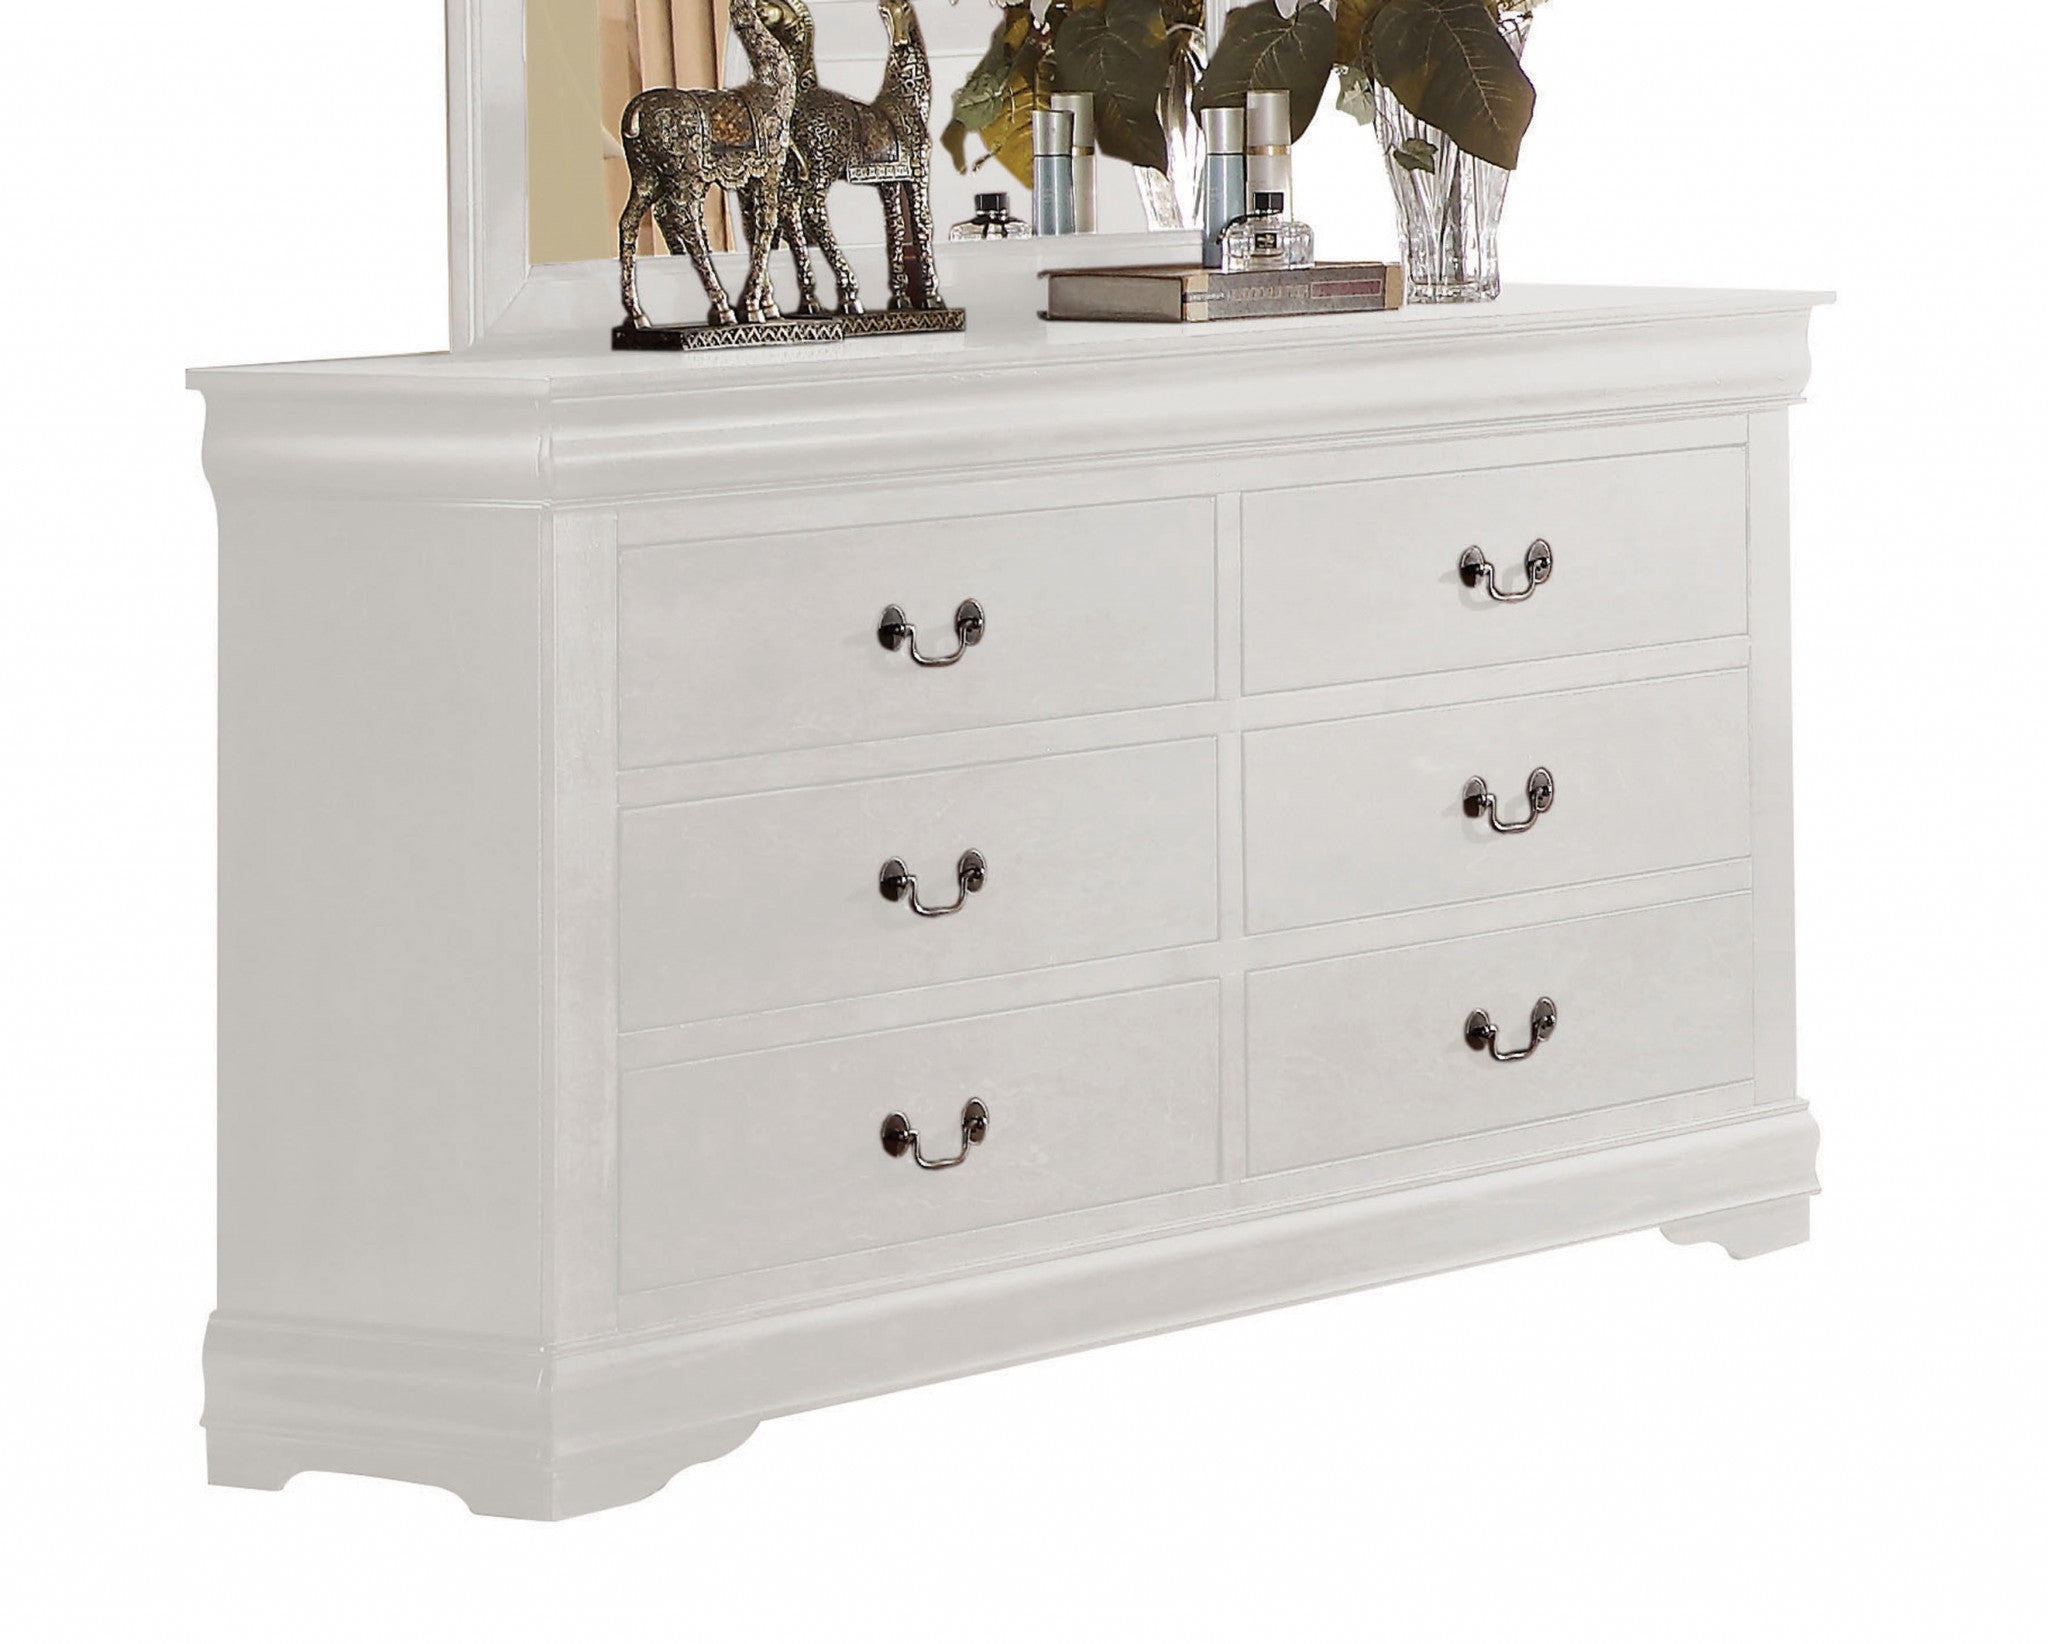 57" White Solid Wood Six Drawer Double Dresser Default Title